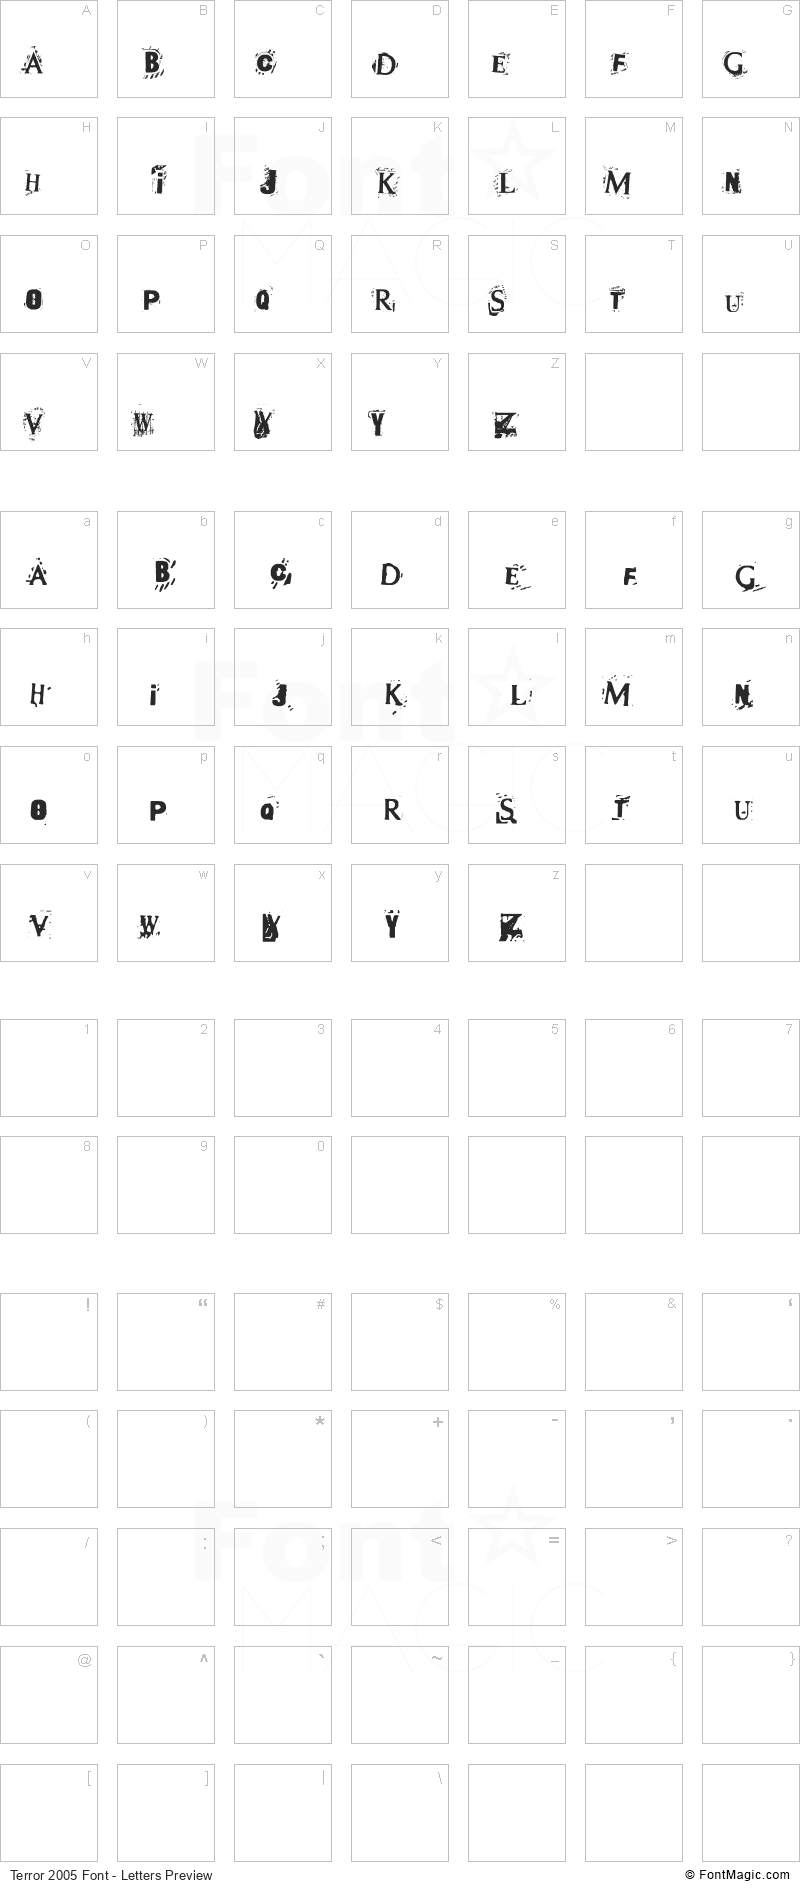 Terror 2005 Font - All Latters Preview Chart